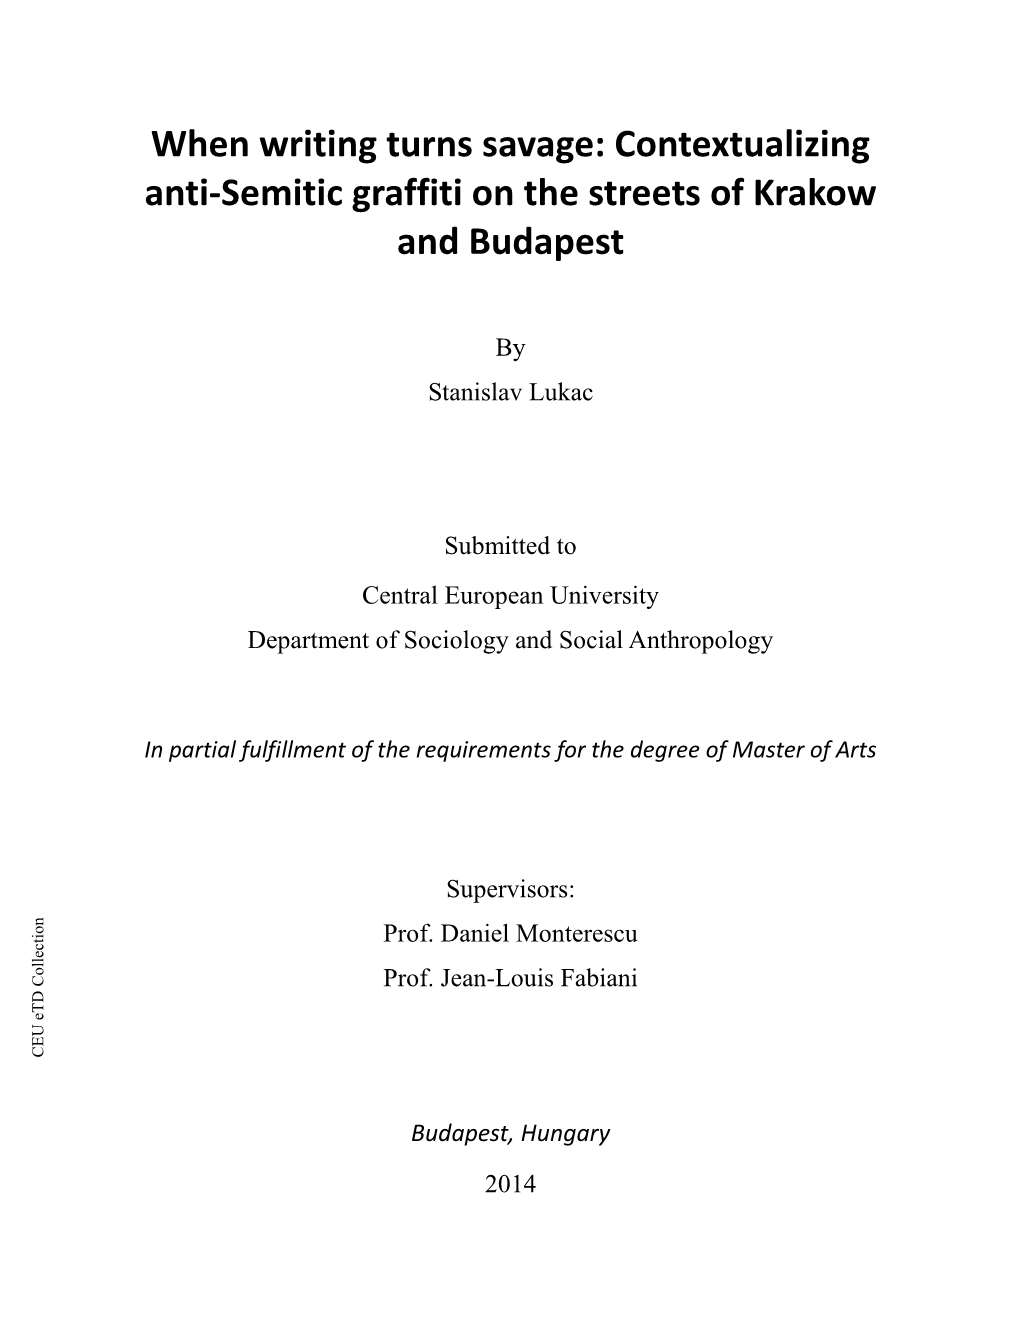 Contextualizing Anti-Semitic Graffiti on the Streets of Krakow and Budapest